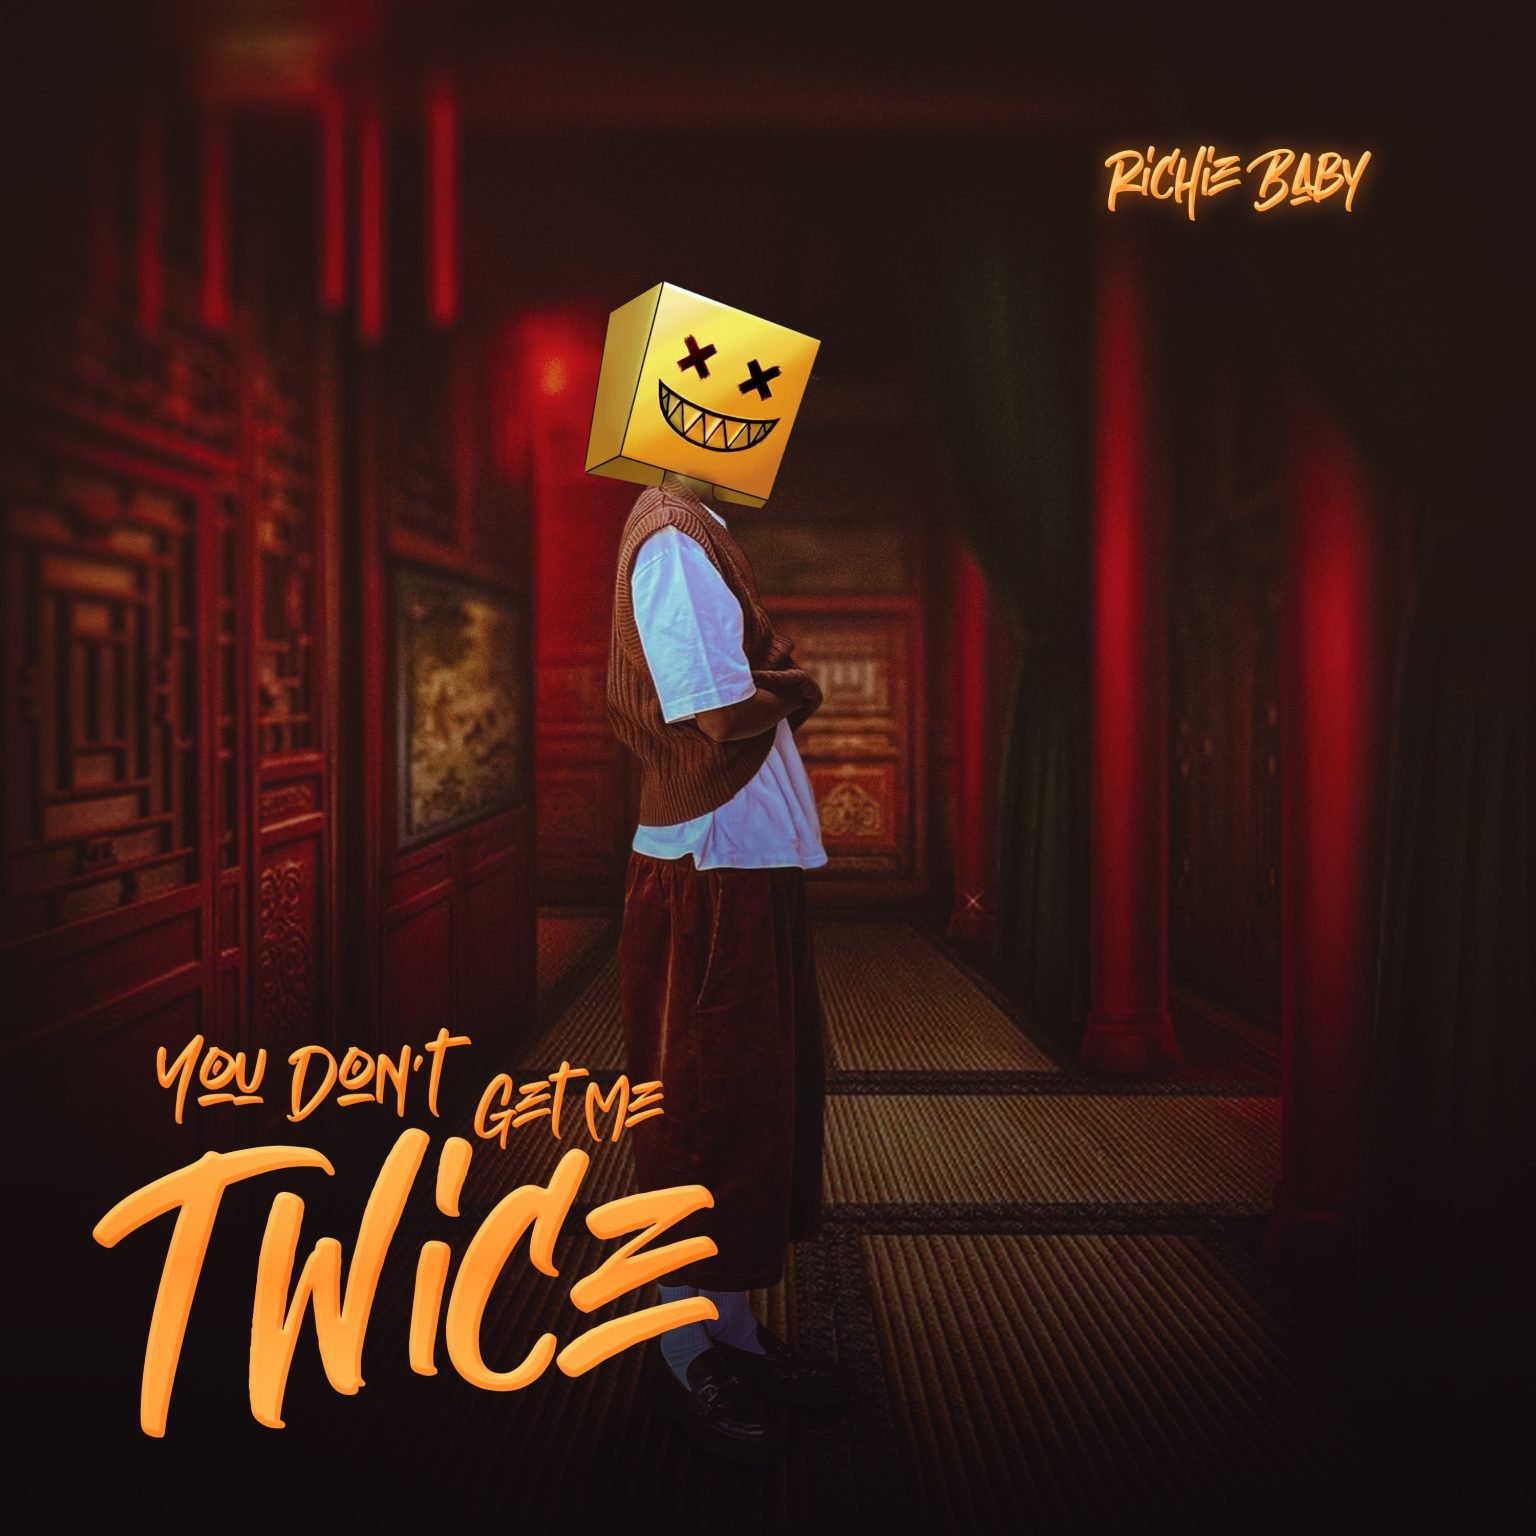 Richie Baby – You Dont Get Me Twice FULL EP